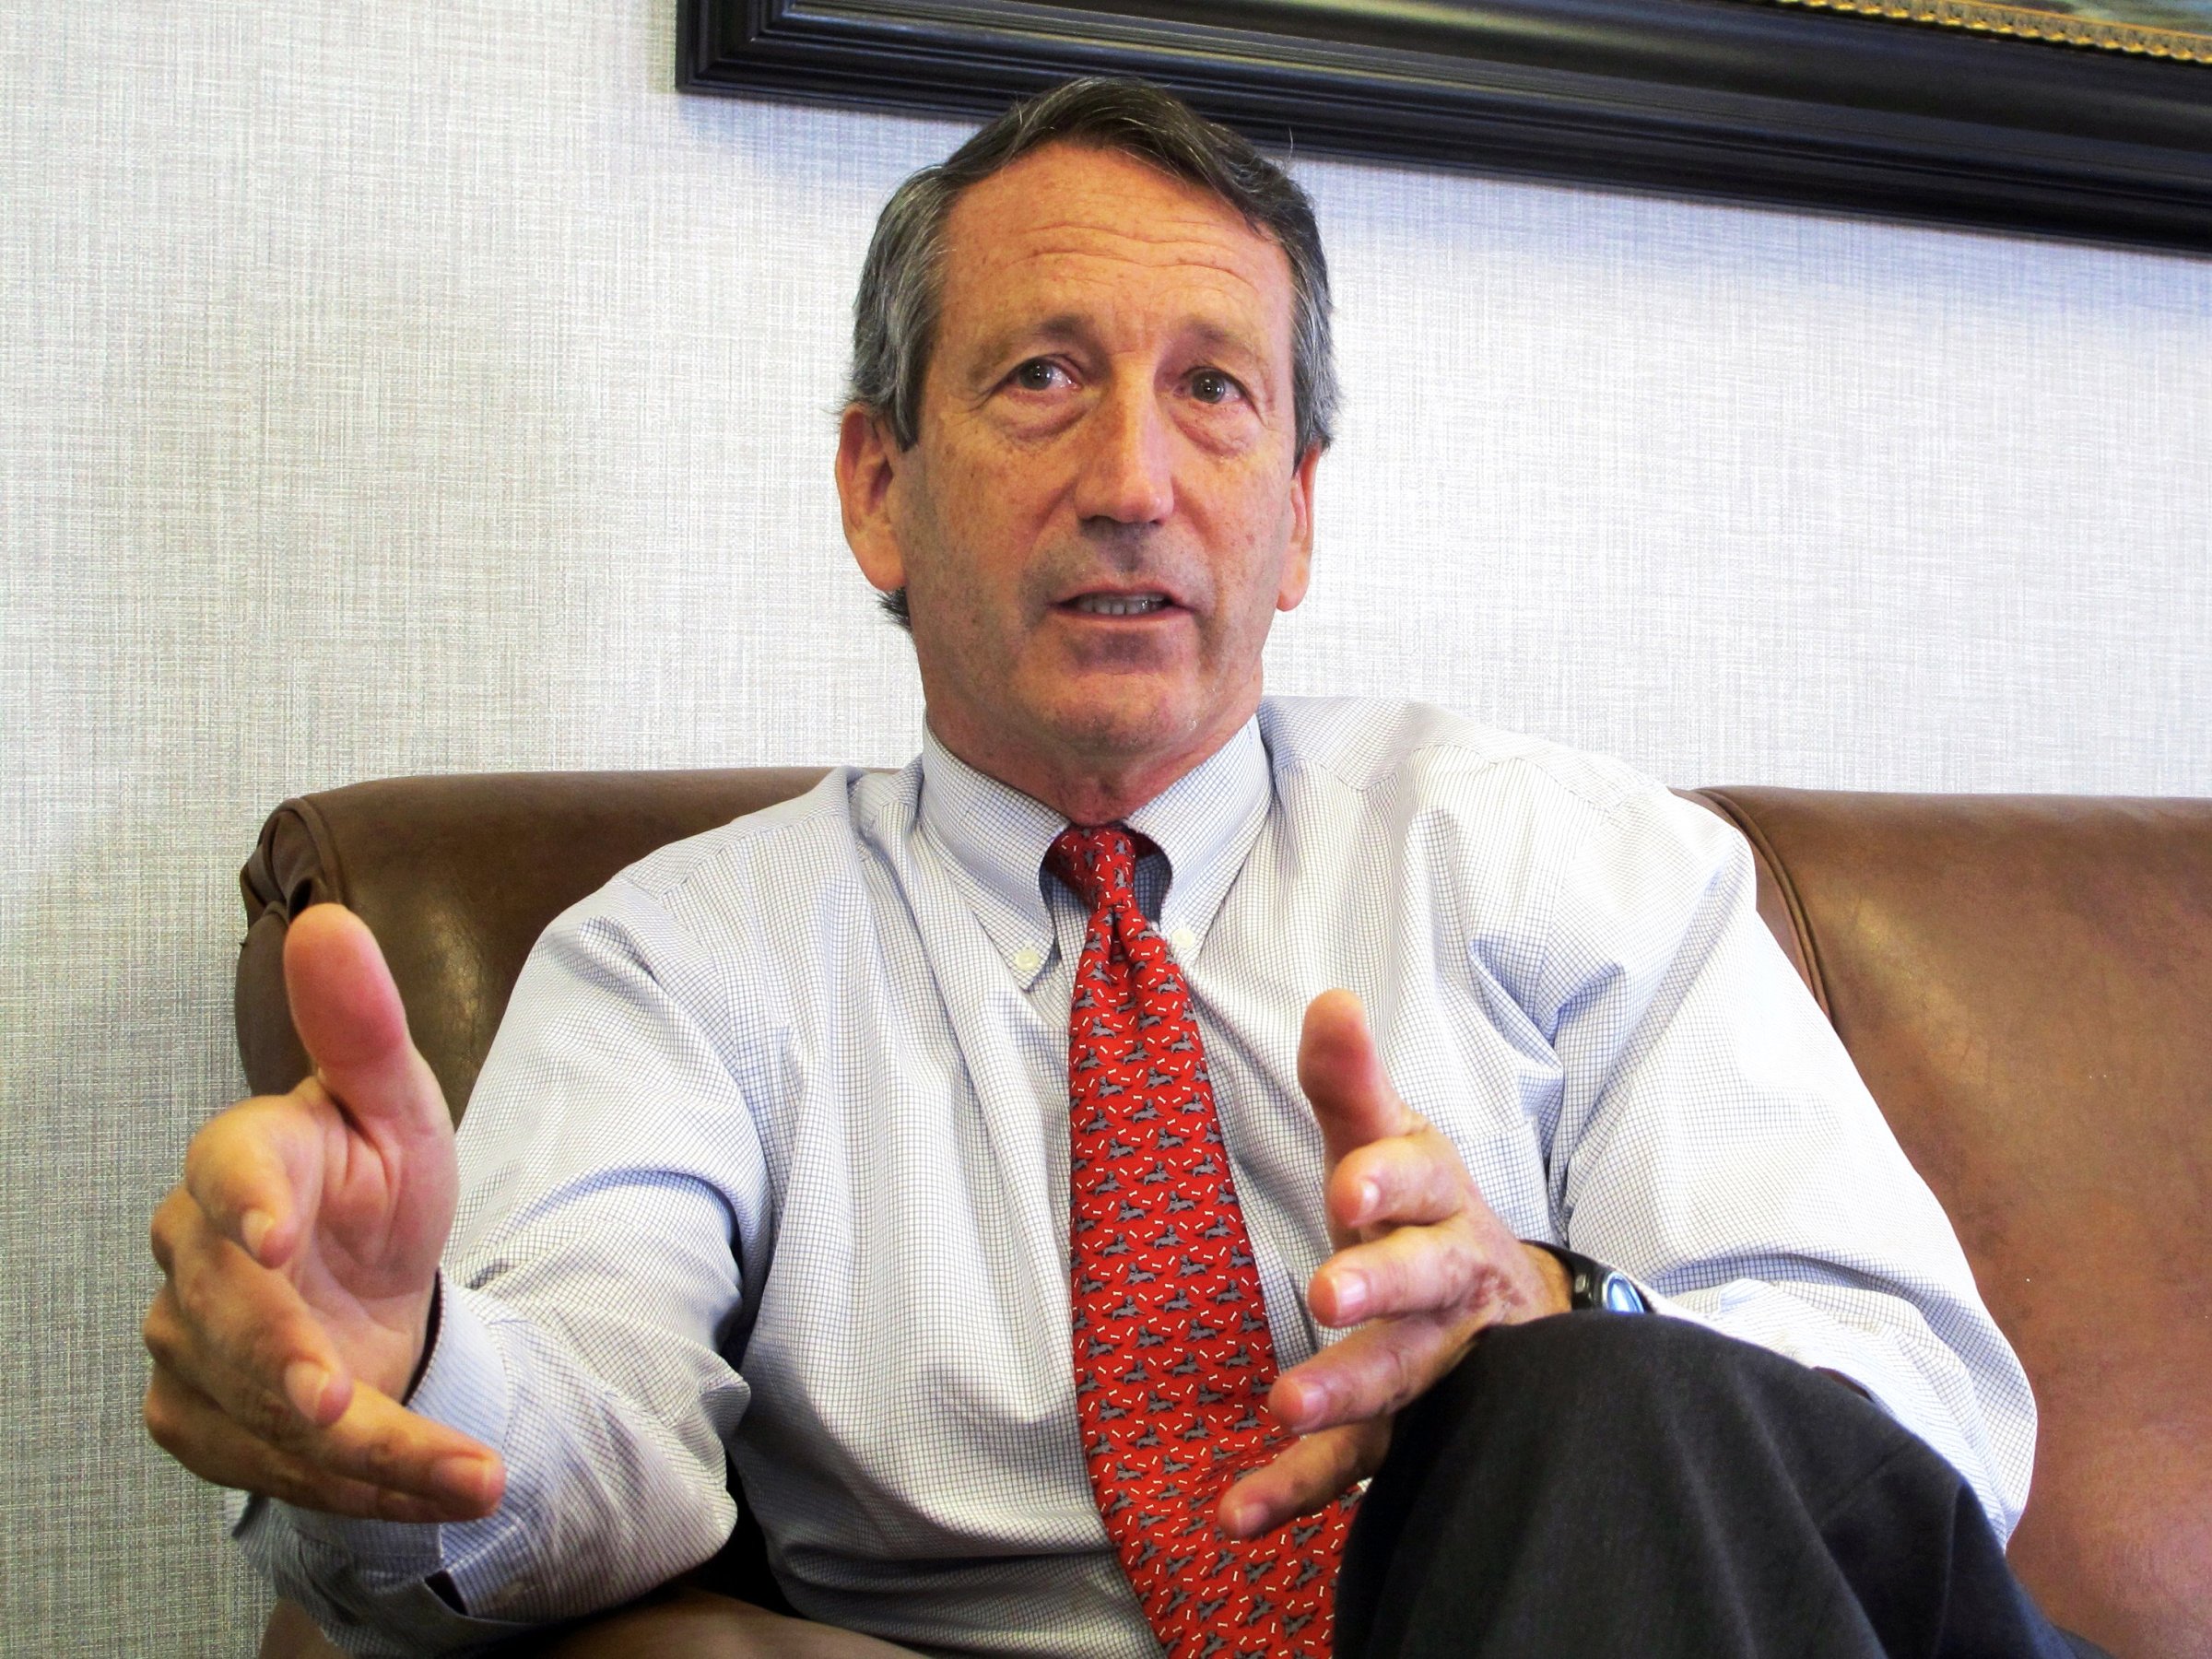 U.S. Rep. Mark Sanford, R-S.C., discusses his first months back in Congress during an Associated Press interview in his district office in Mount Pleasant, S.C. on Dec. 18, 2013.